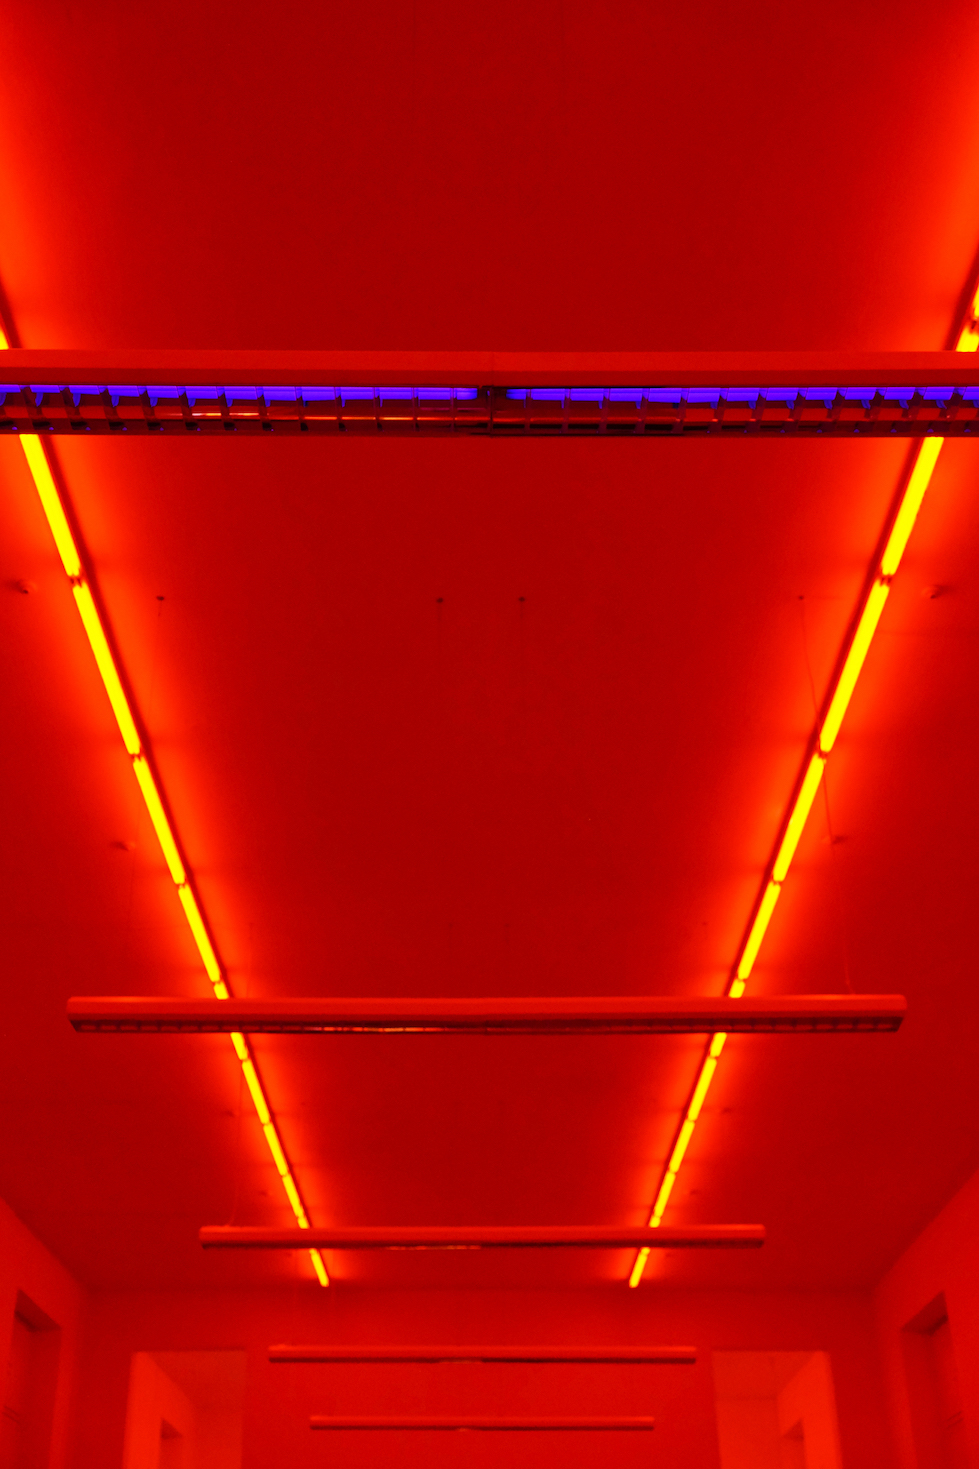  Brud,  Black and White and Red All Over,  ongoing, installation, ultraviolet light, infrared light, daylight, variable dimensions 